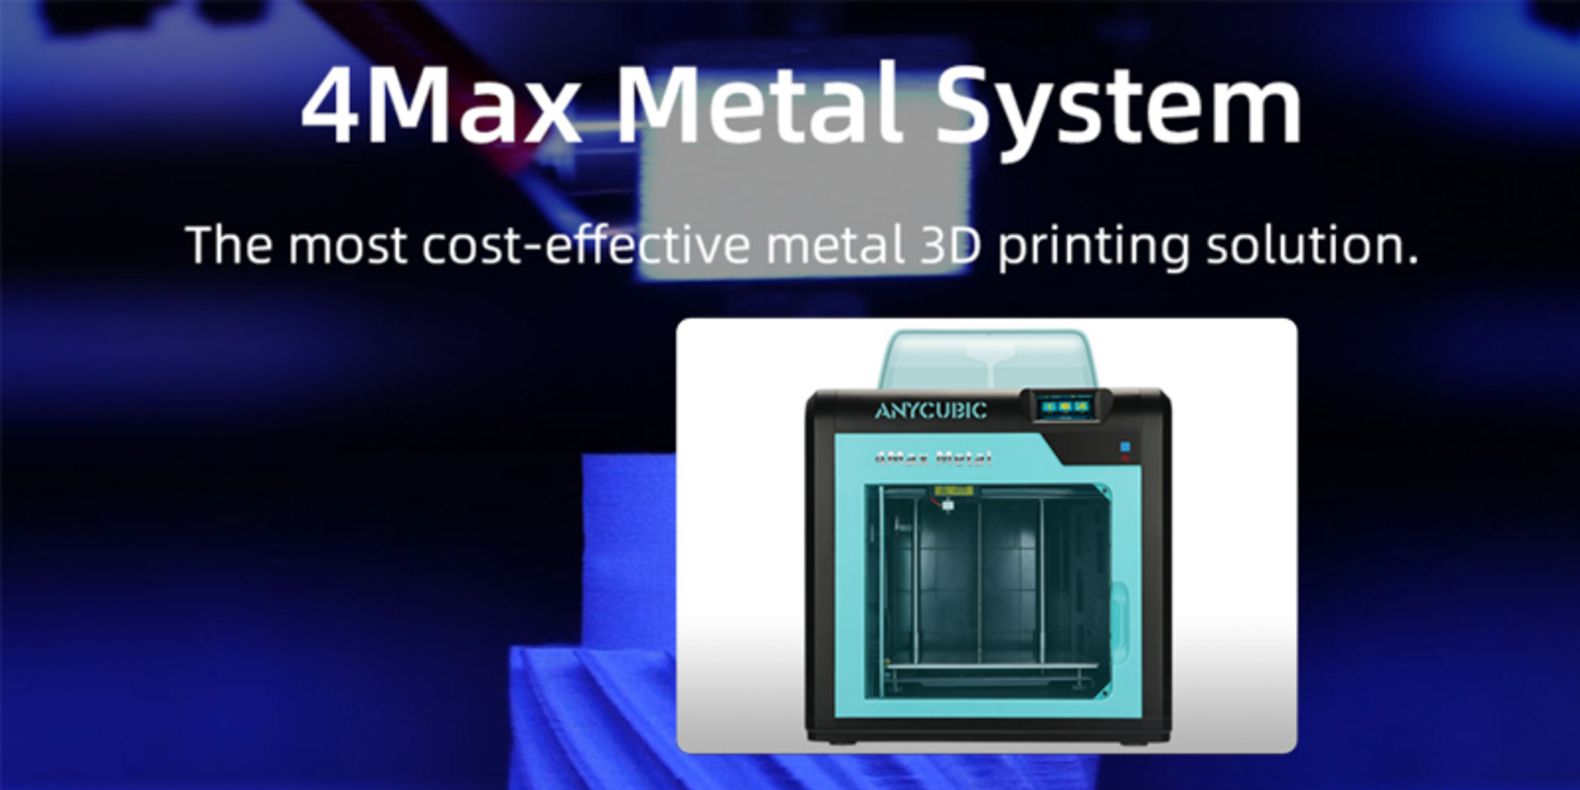 Anycubic 4 Max Metal: affordable solution provider for metal 3D printing